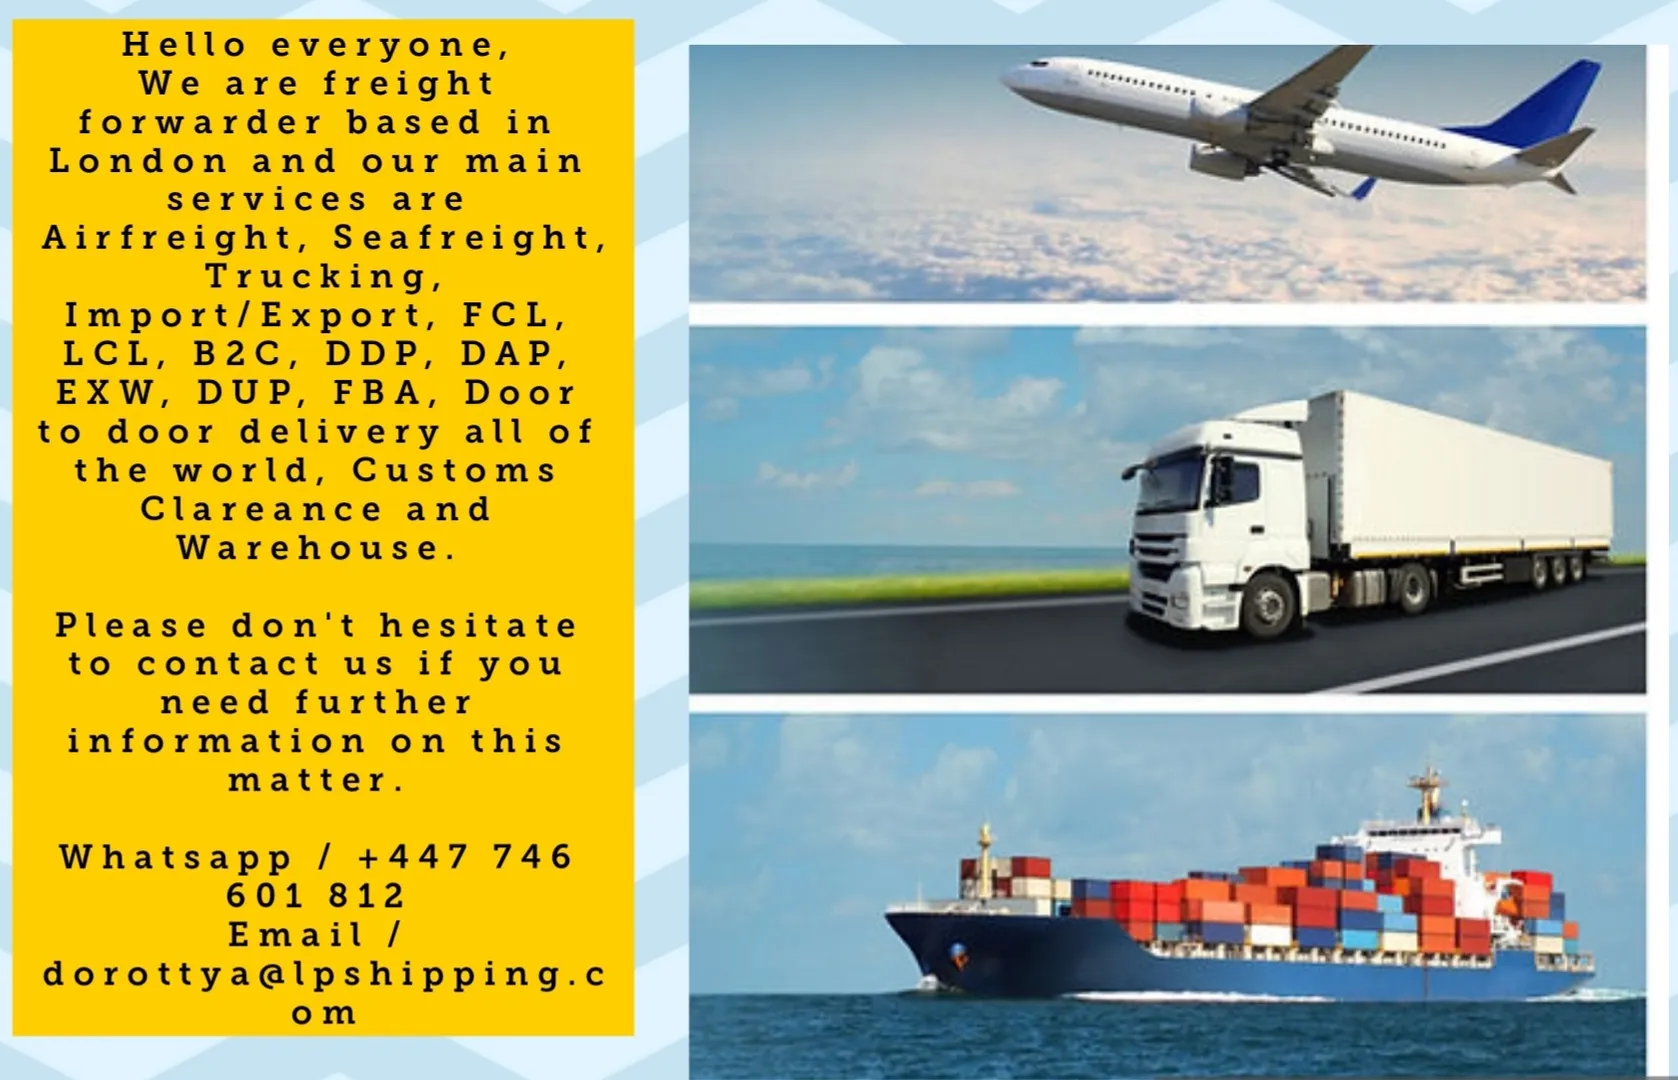 Hello everyone
Increase your business with us without border 
Mail: dorottya@lpshipping.com